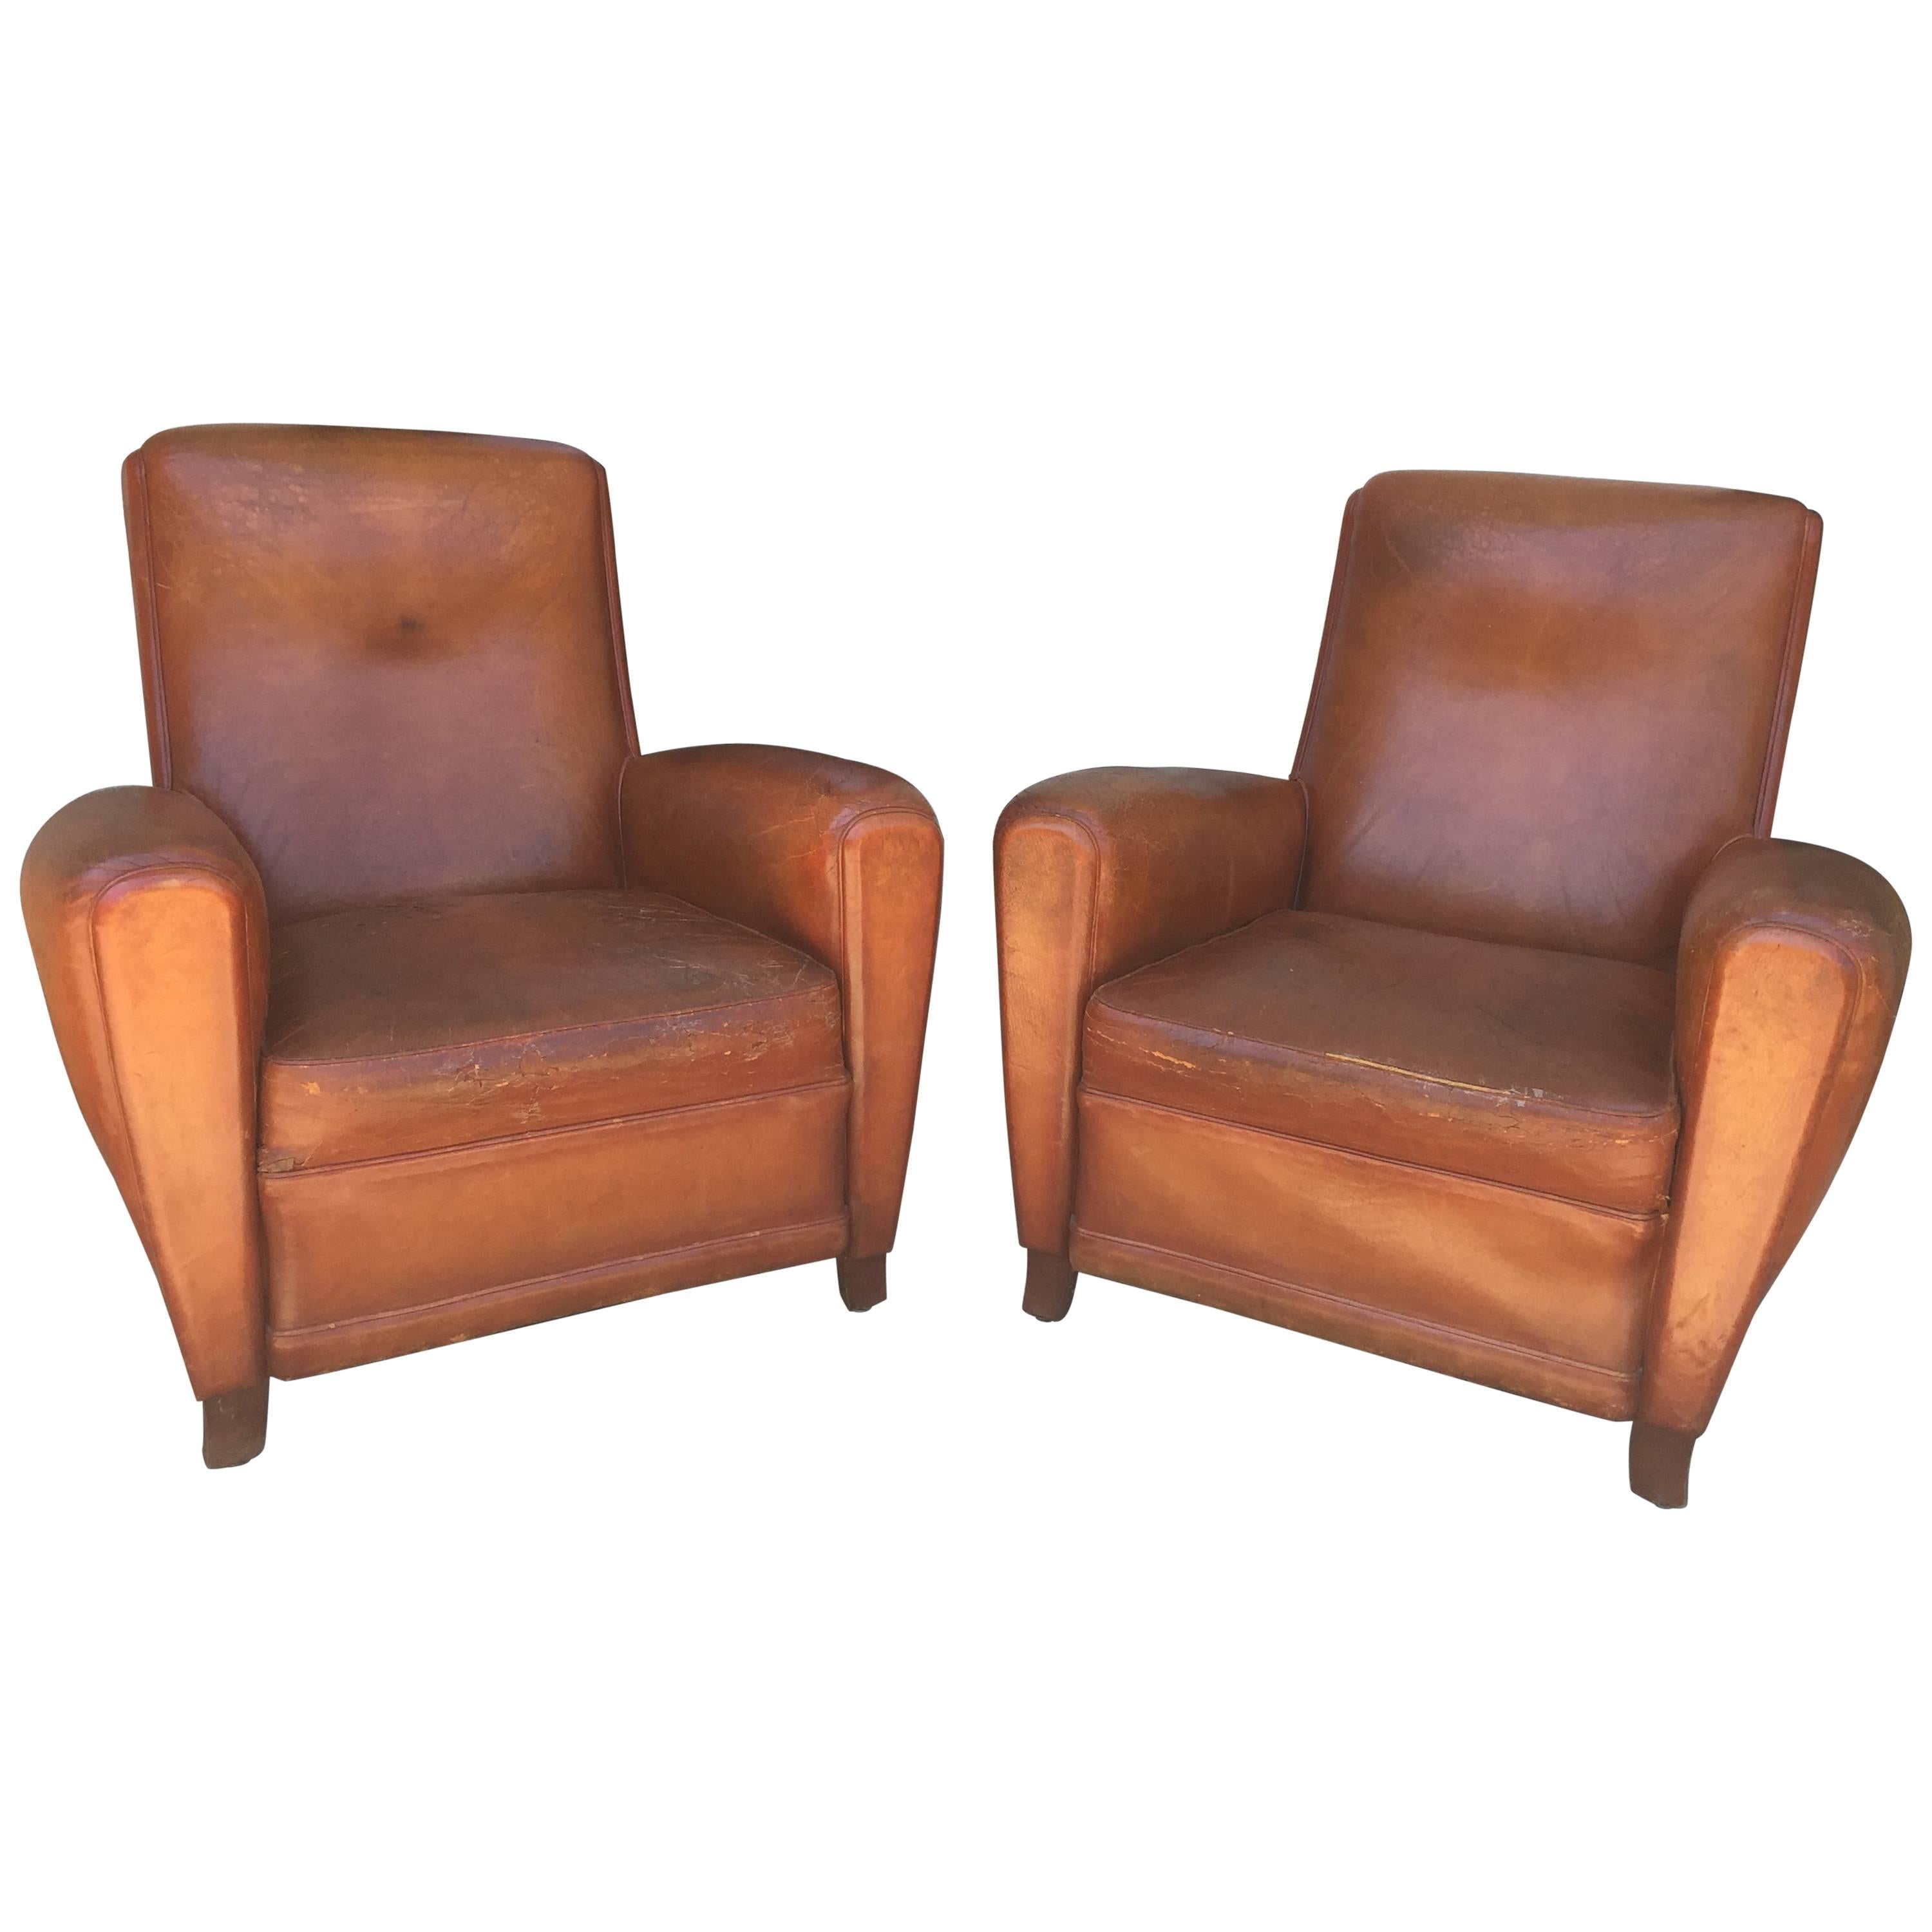 French Deco Club Chairs in Cognac Leather, Pair